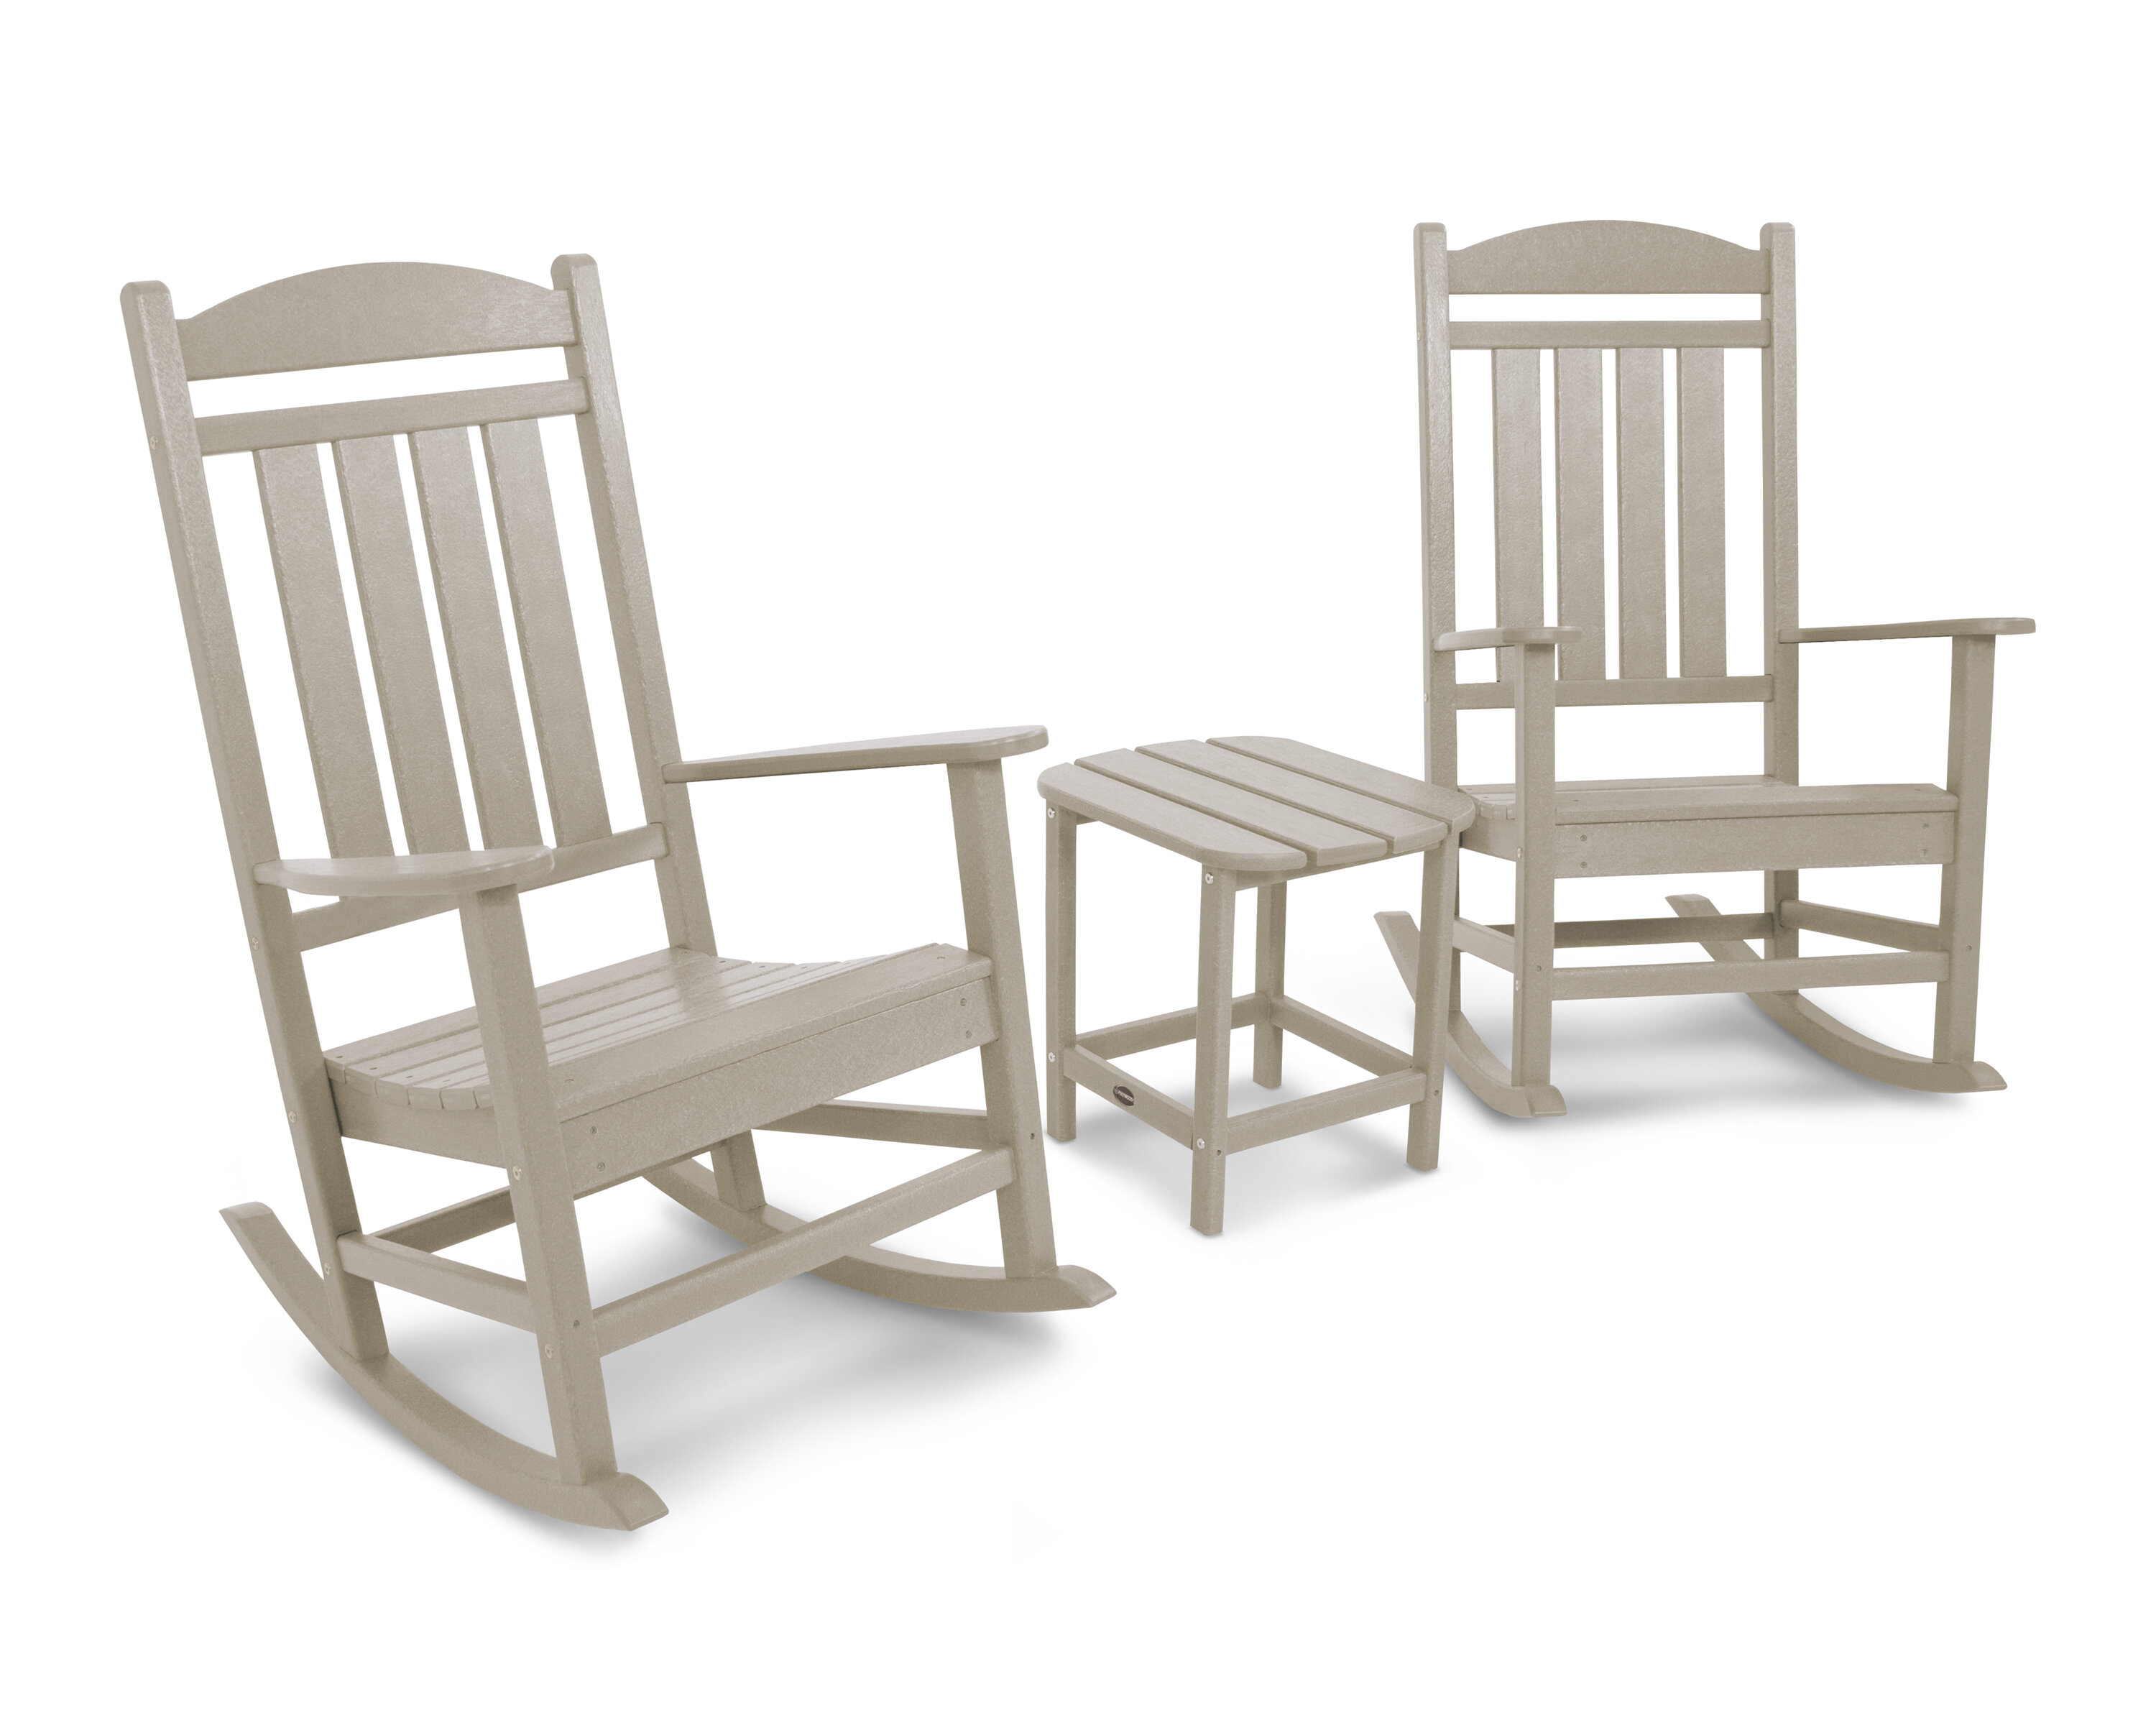 Polywood Presidential Rocking Chair 3 Piece Seating Group